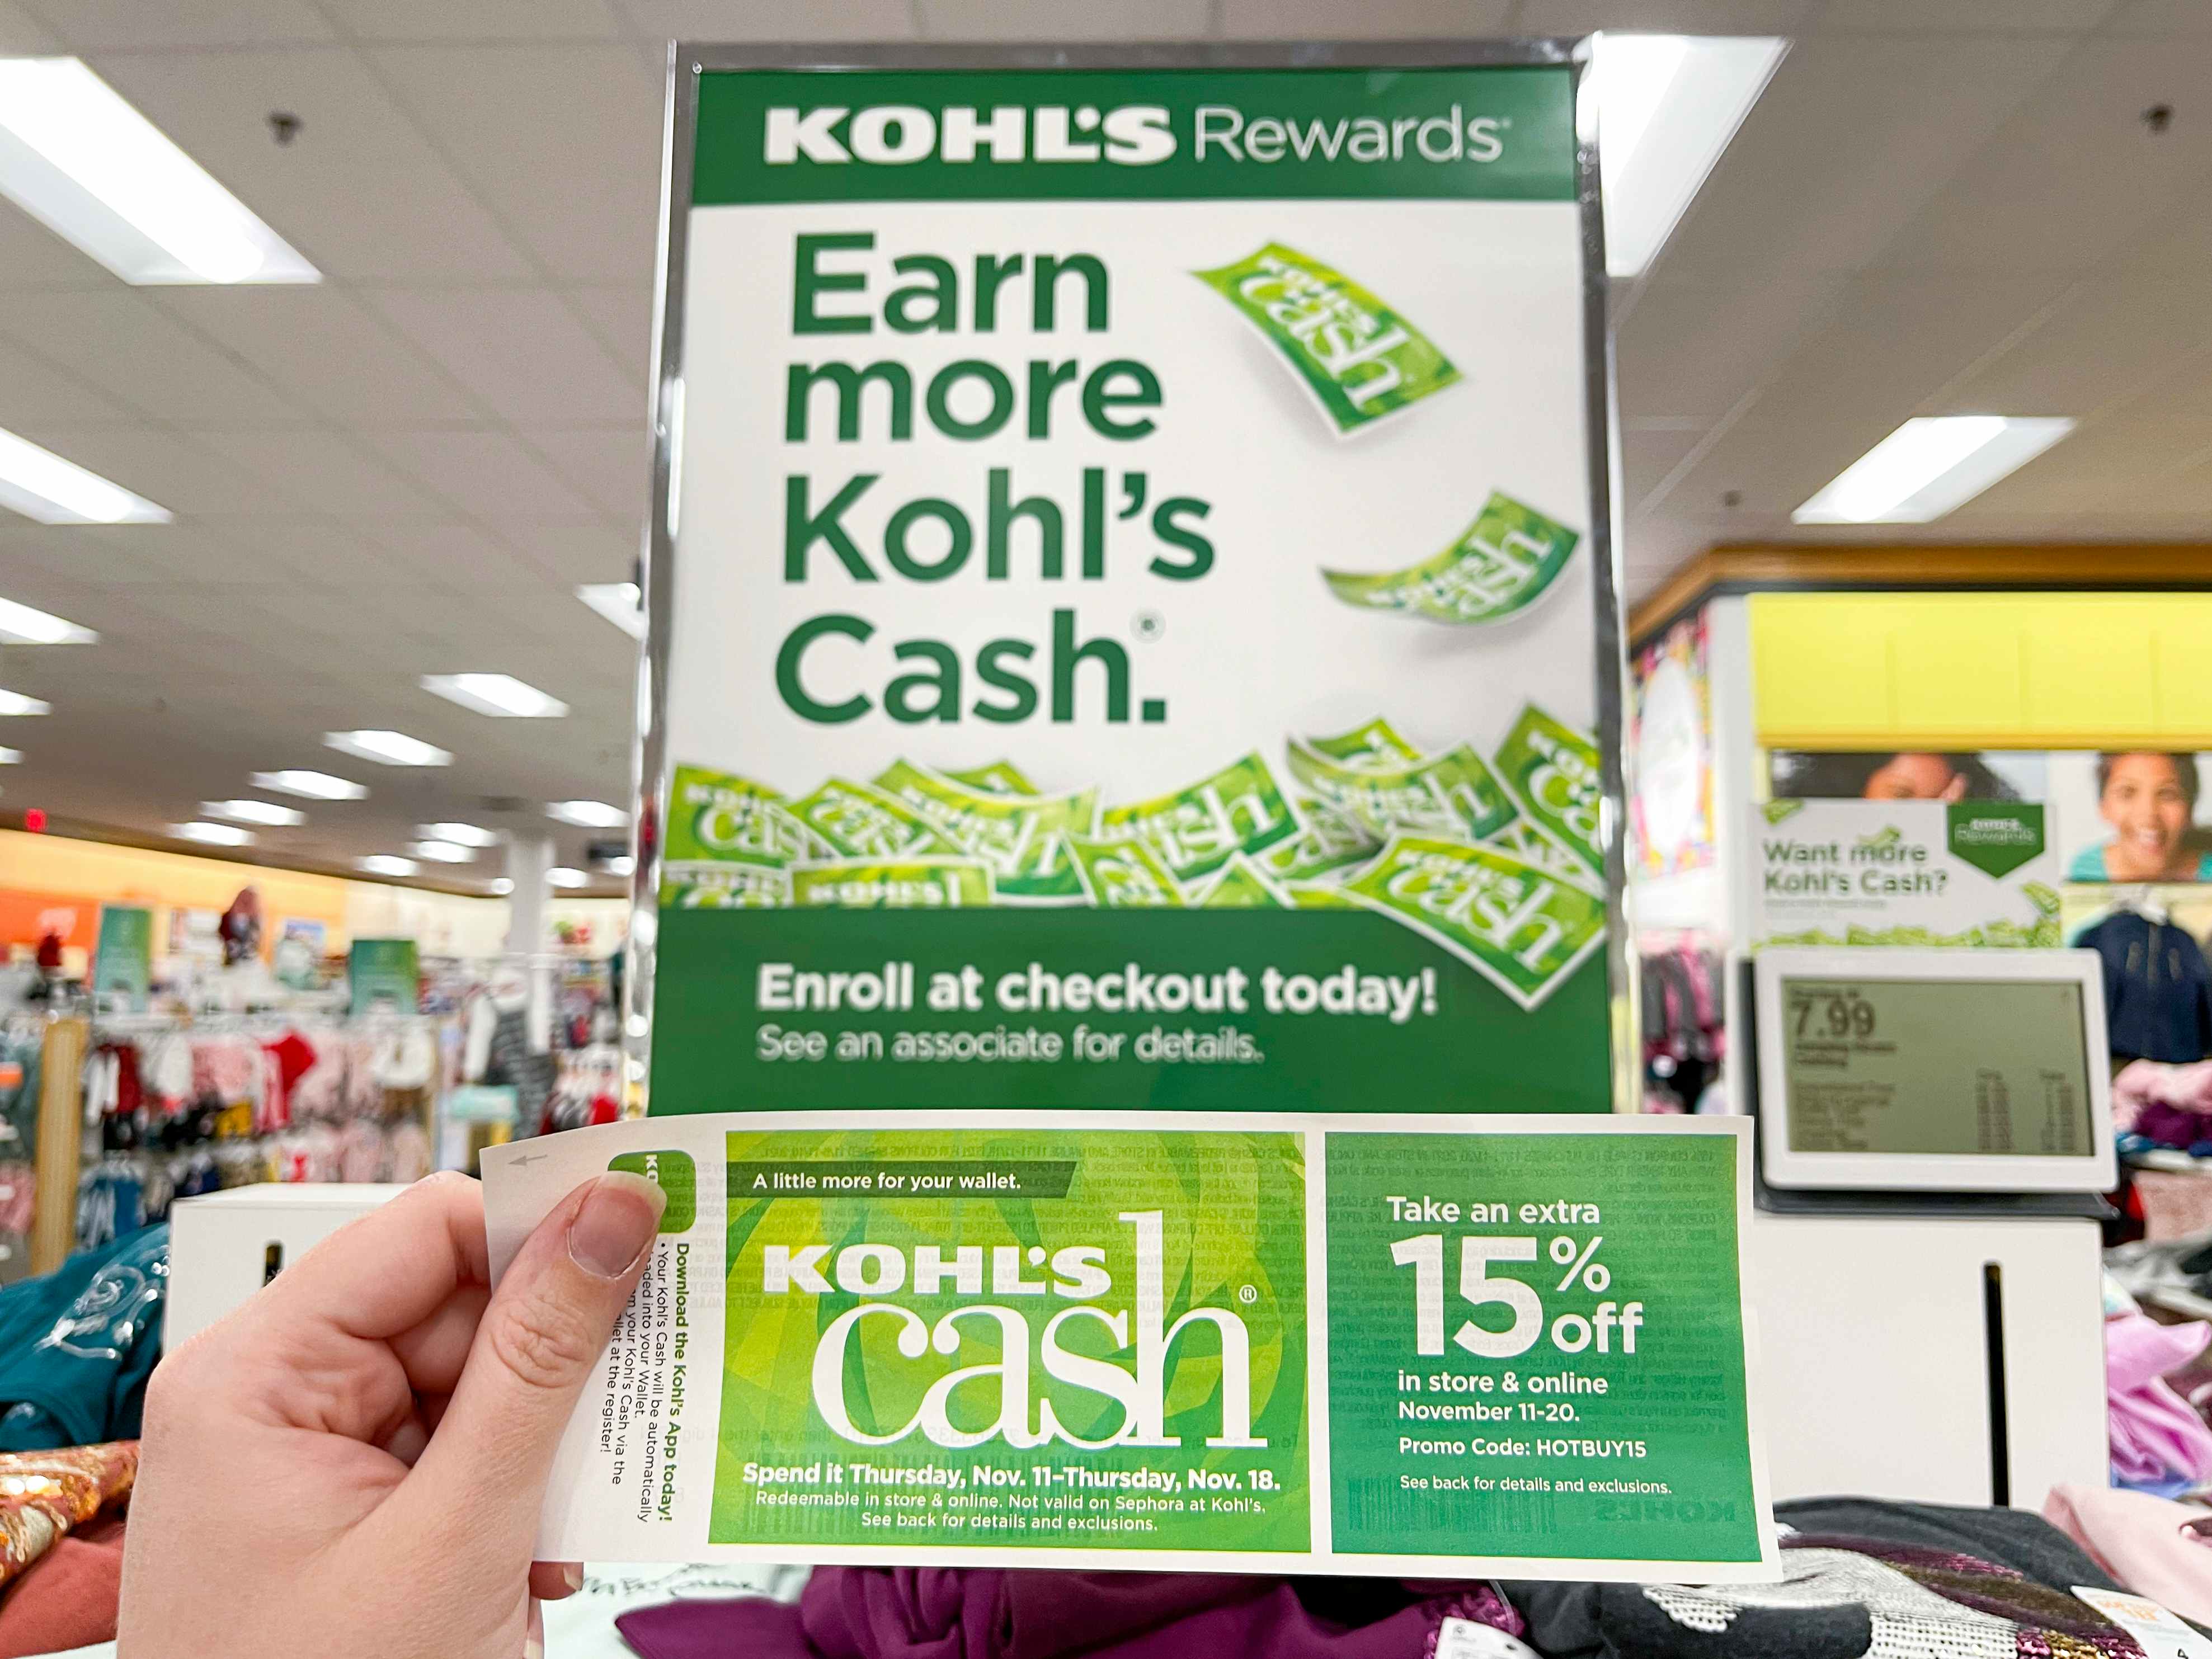 Kohl's Gives Members 50% More on Rewards